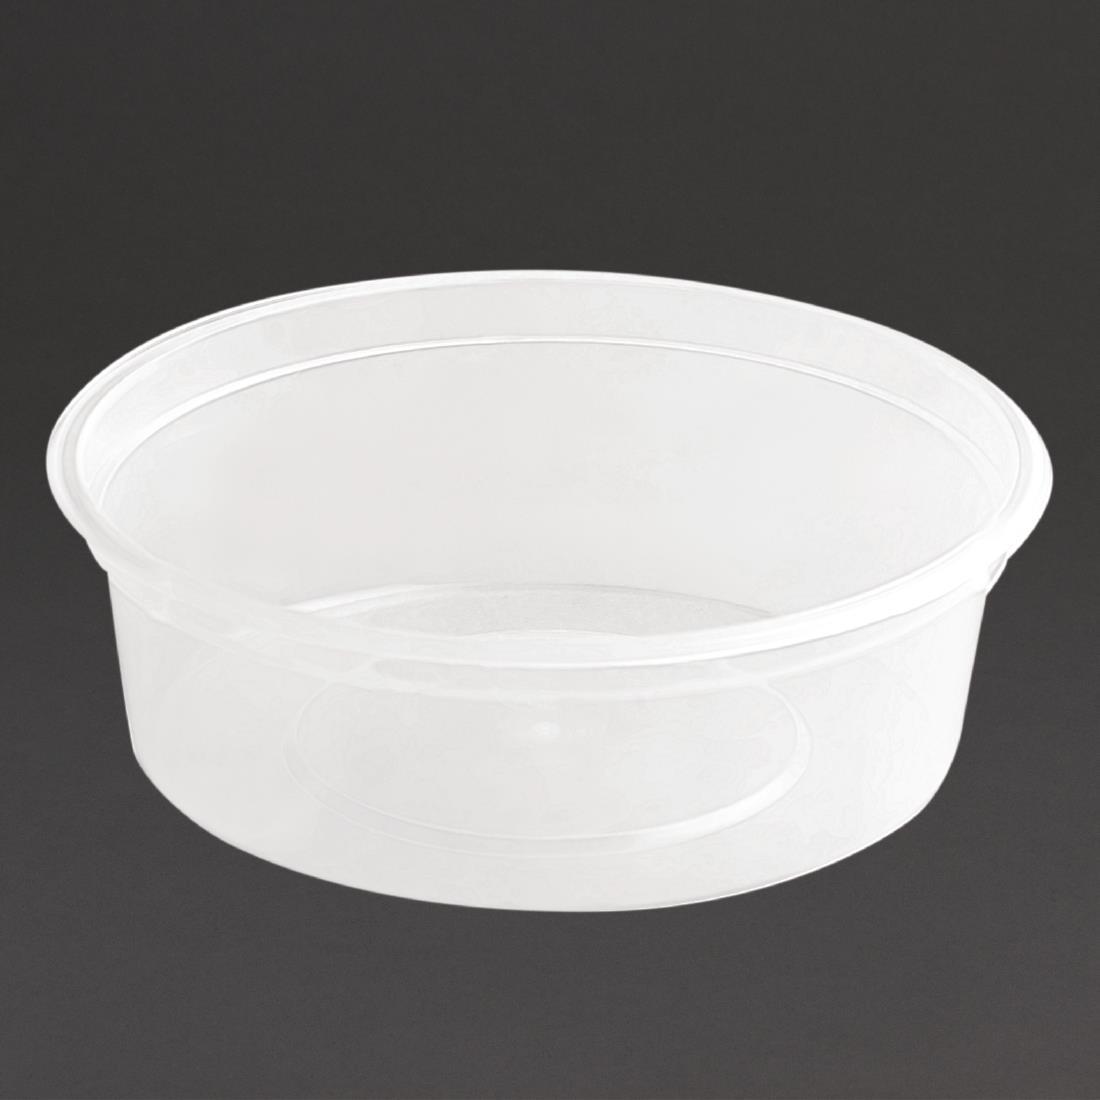 Fiesta Recyclable Plastic Microwavable Deli Pots 50ml / 1.75oz (Pack of 100) - CT285  - 1